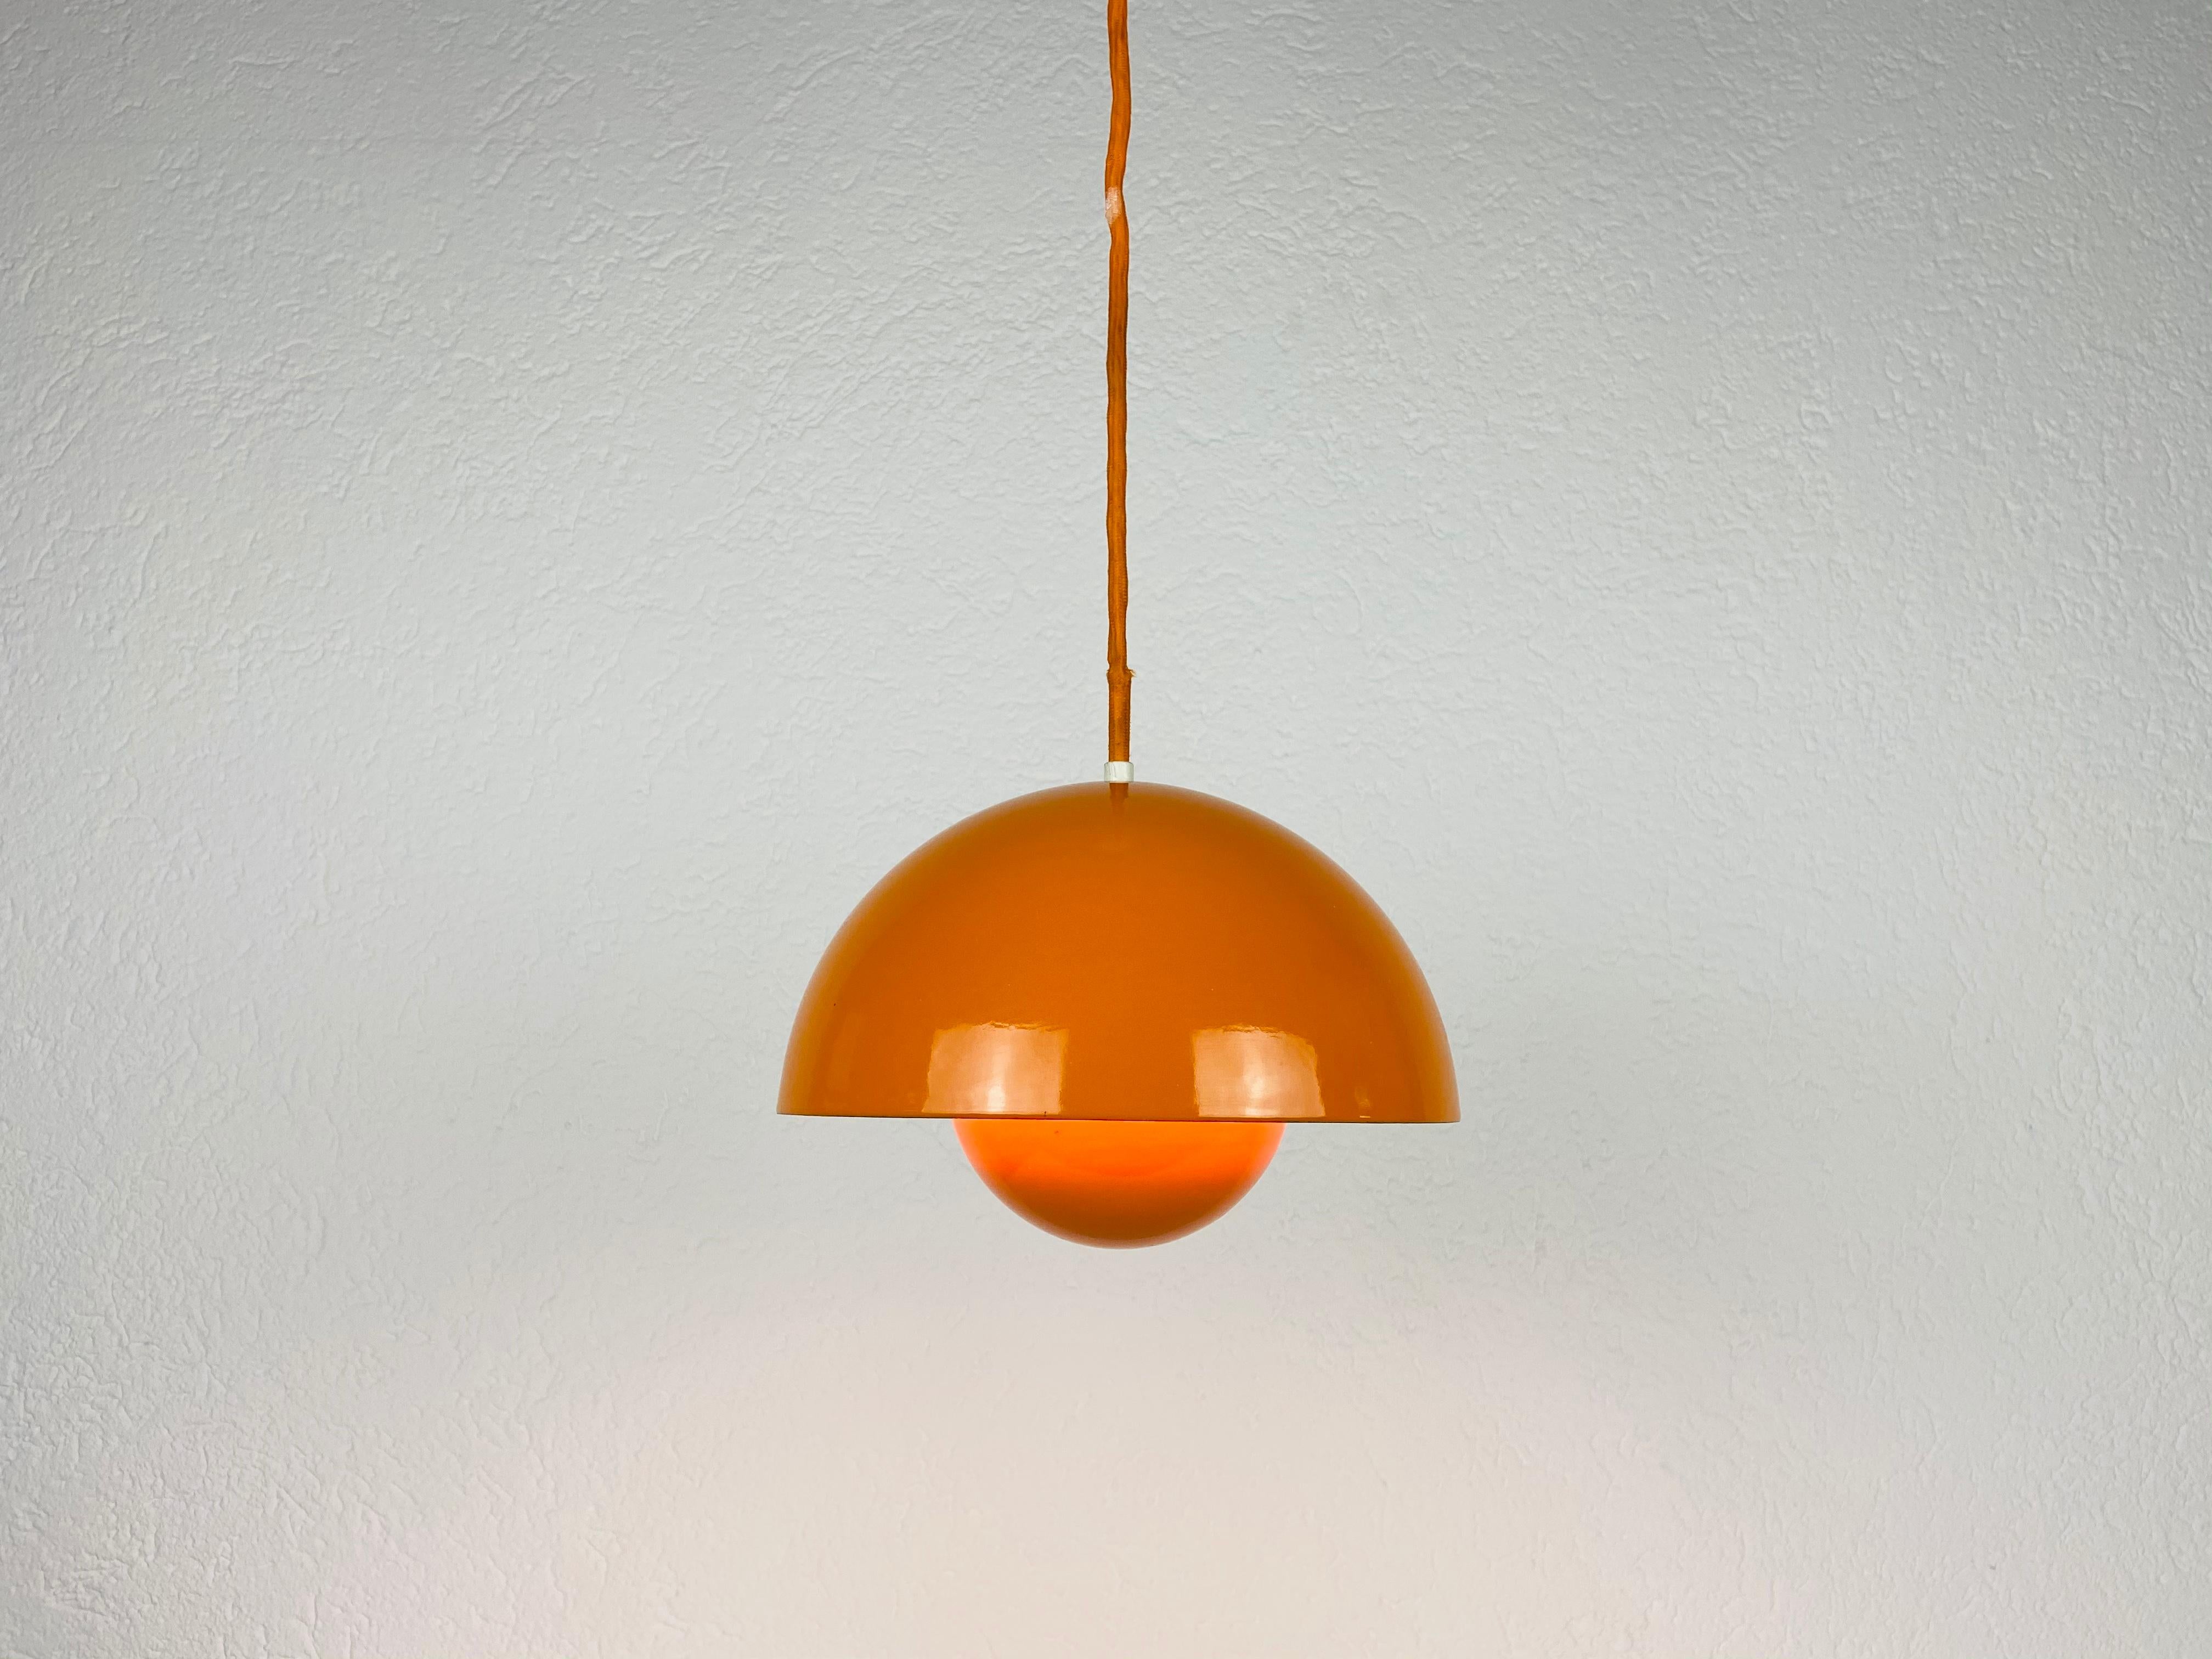 Metal pendant lamp by Verner Panton for Louis Panton made in the 1960s. 

Measures: Height of shade 15 cm

Max height 100 cm

Diameter 21.5 cm

The light requires one E27 light bulb. Works with both 120V/220V. Good vintage condition.

Free